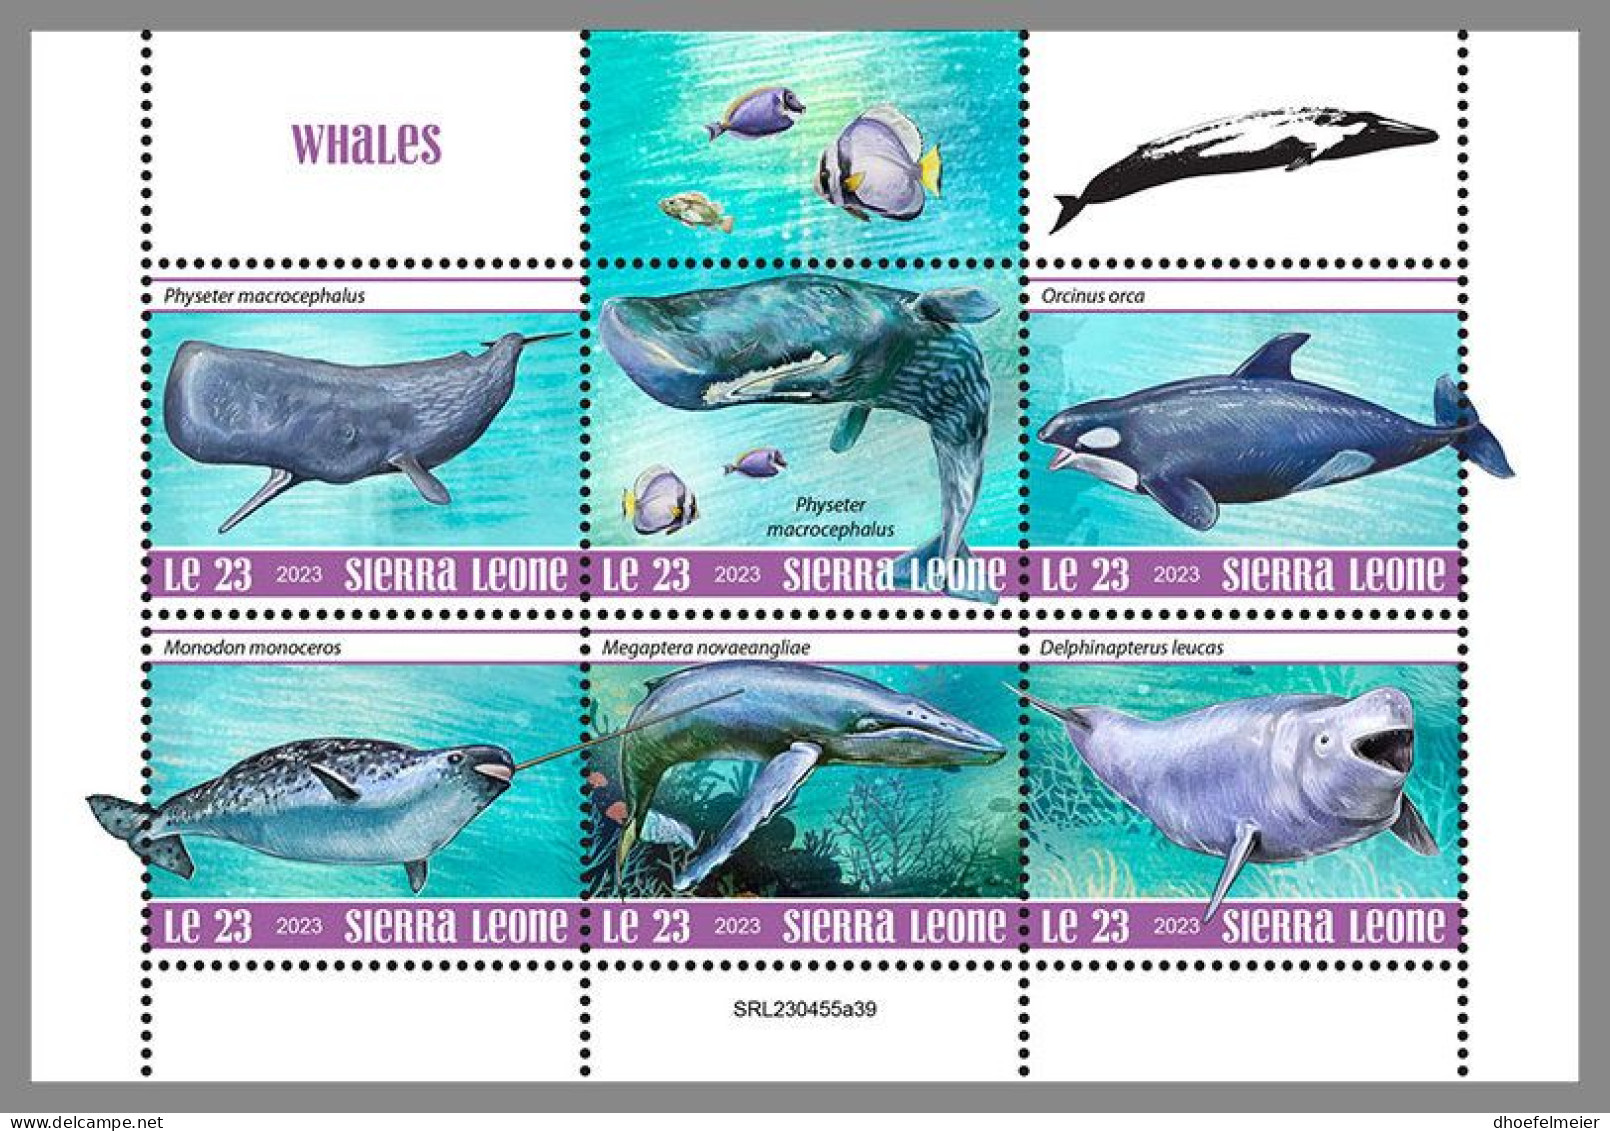 SIERRA LEONE 2023 MNH Whales Wale M/S – OFFICIAL ISSUE – DHQ2413 - Whales